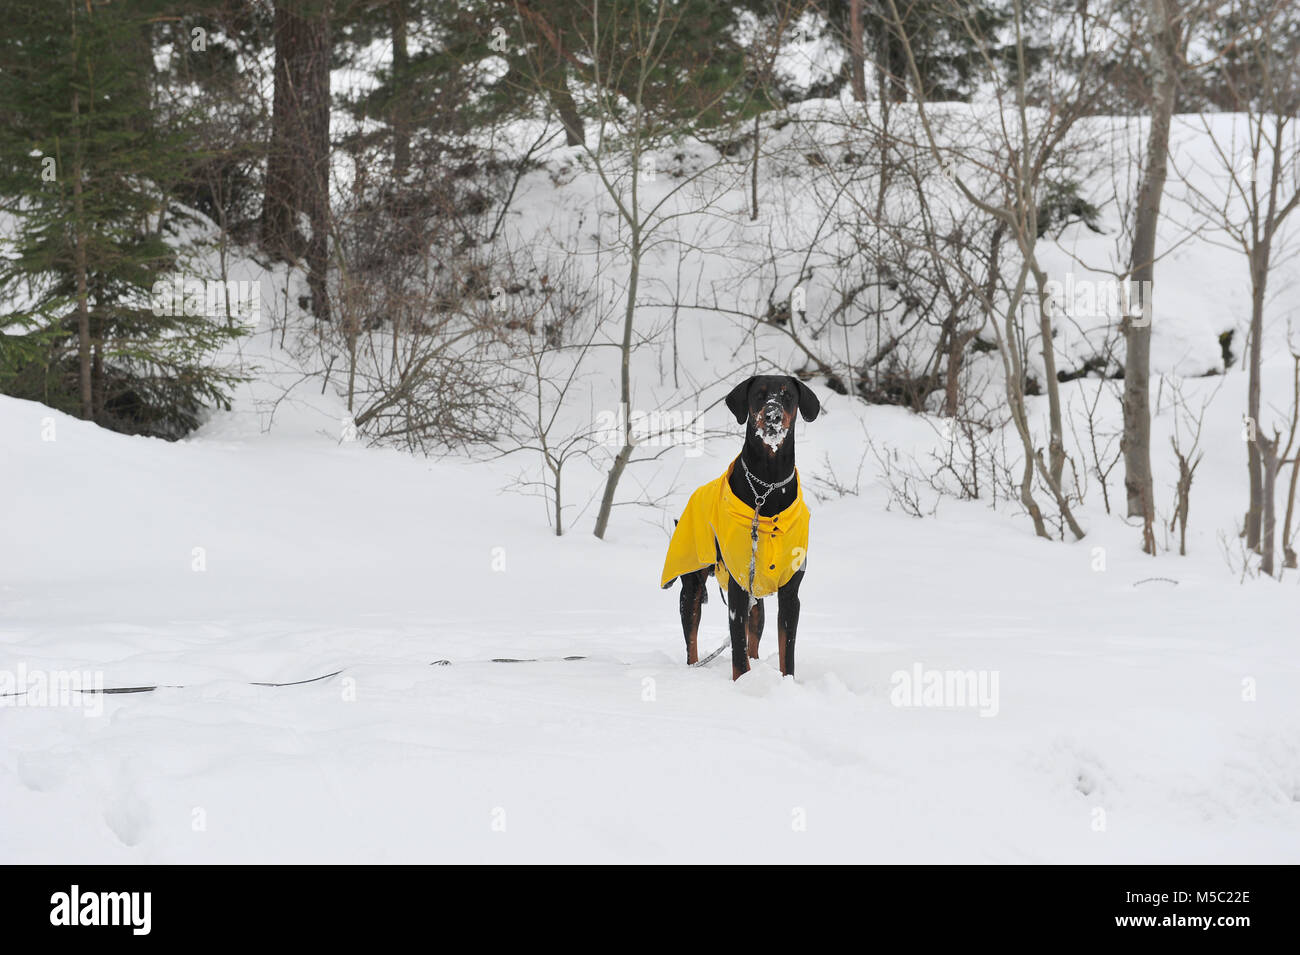 Photo of standing male doberman dog with snow on his face.  Snowy background and winter scene. Copy space to the left of horizontal image.  The dog is Stock Photo